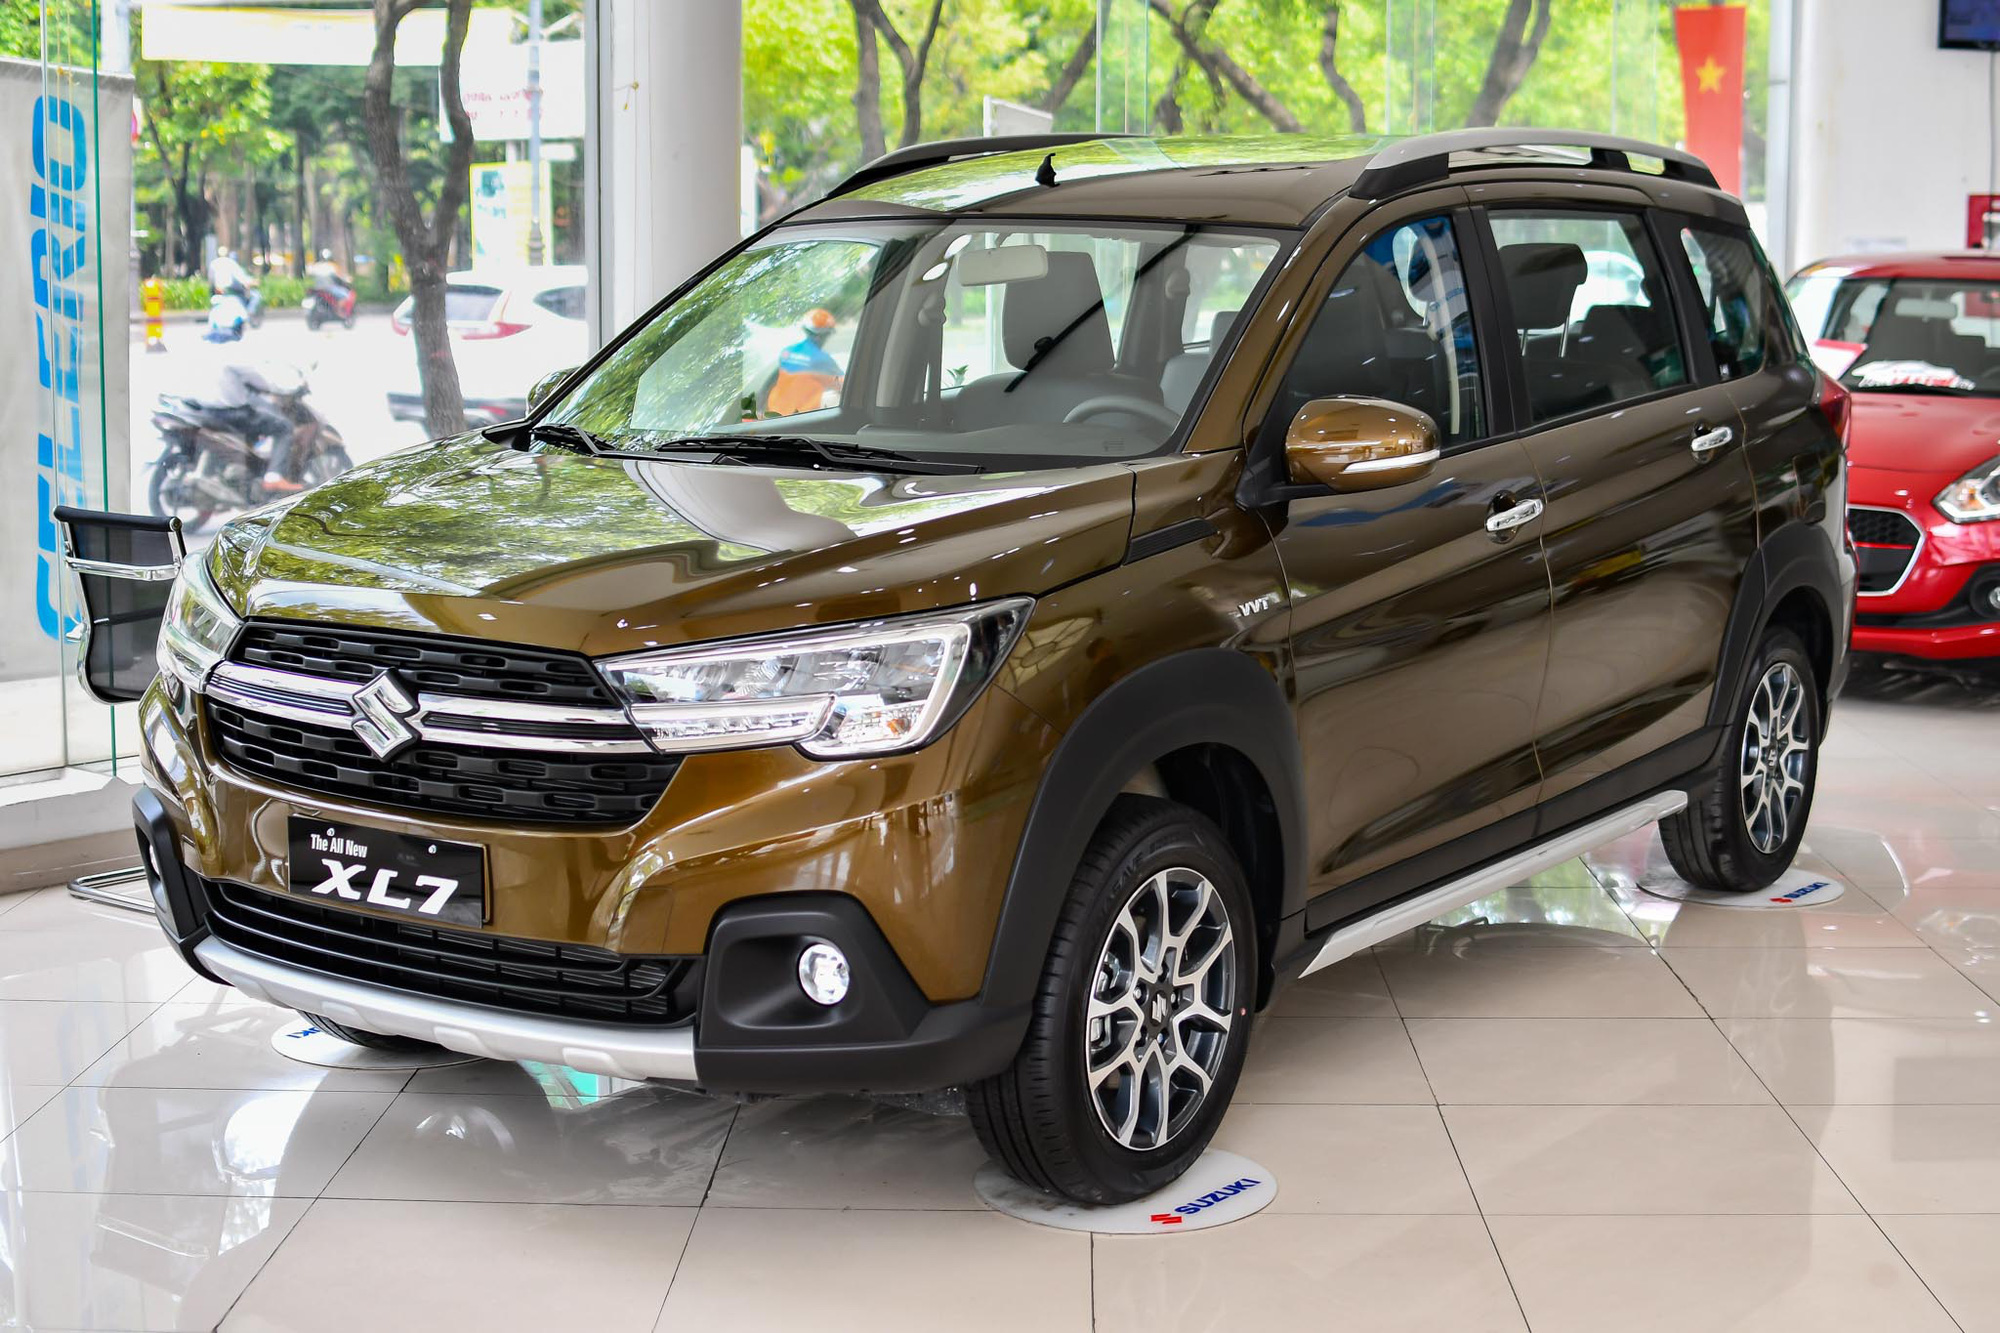 Suzuki launched a new version of XL7 for just over 500 million VND